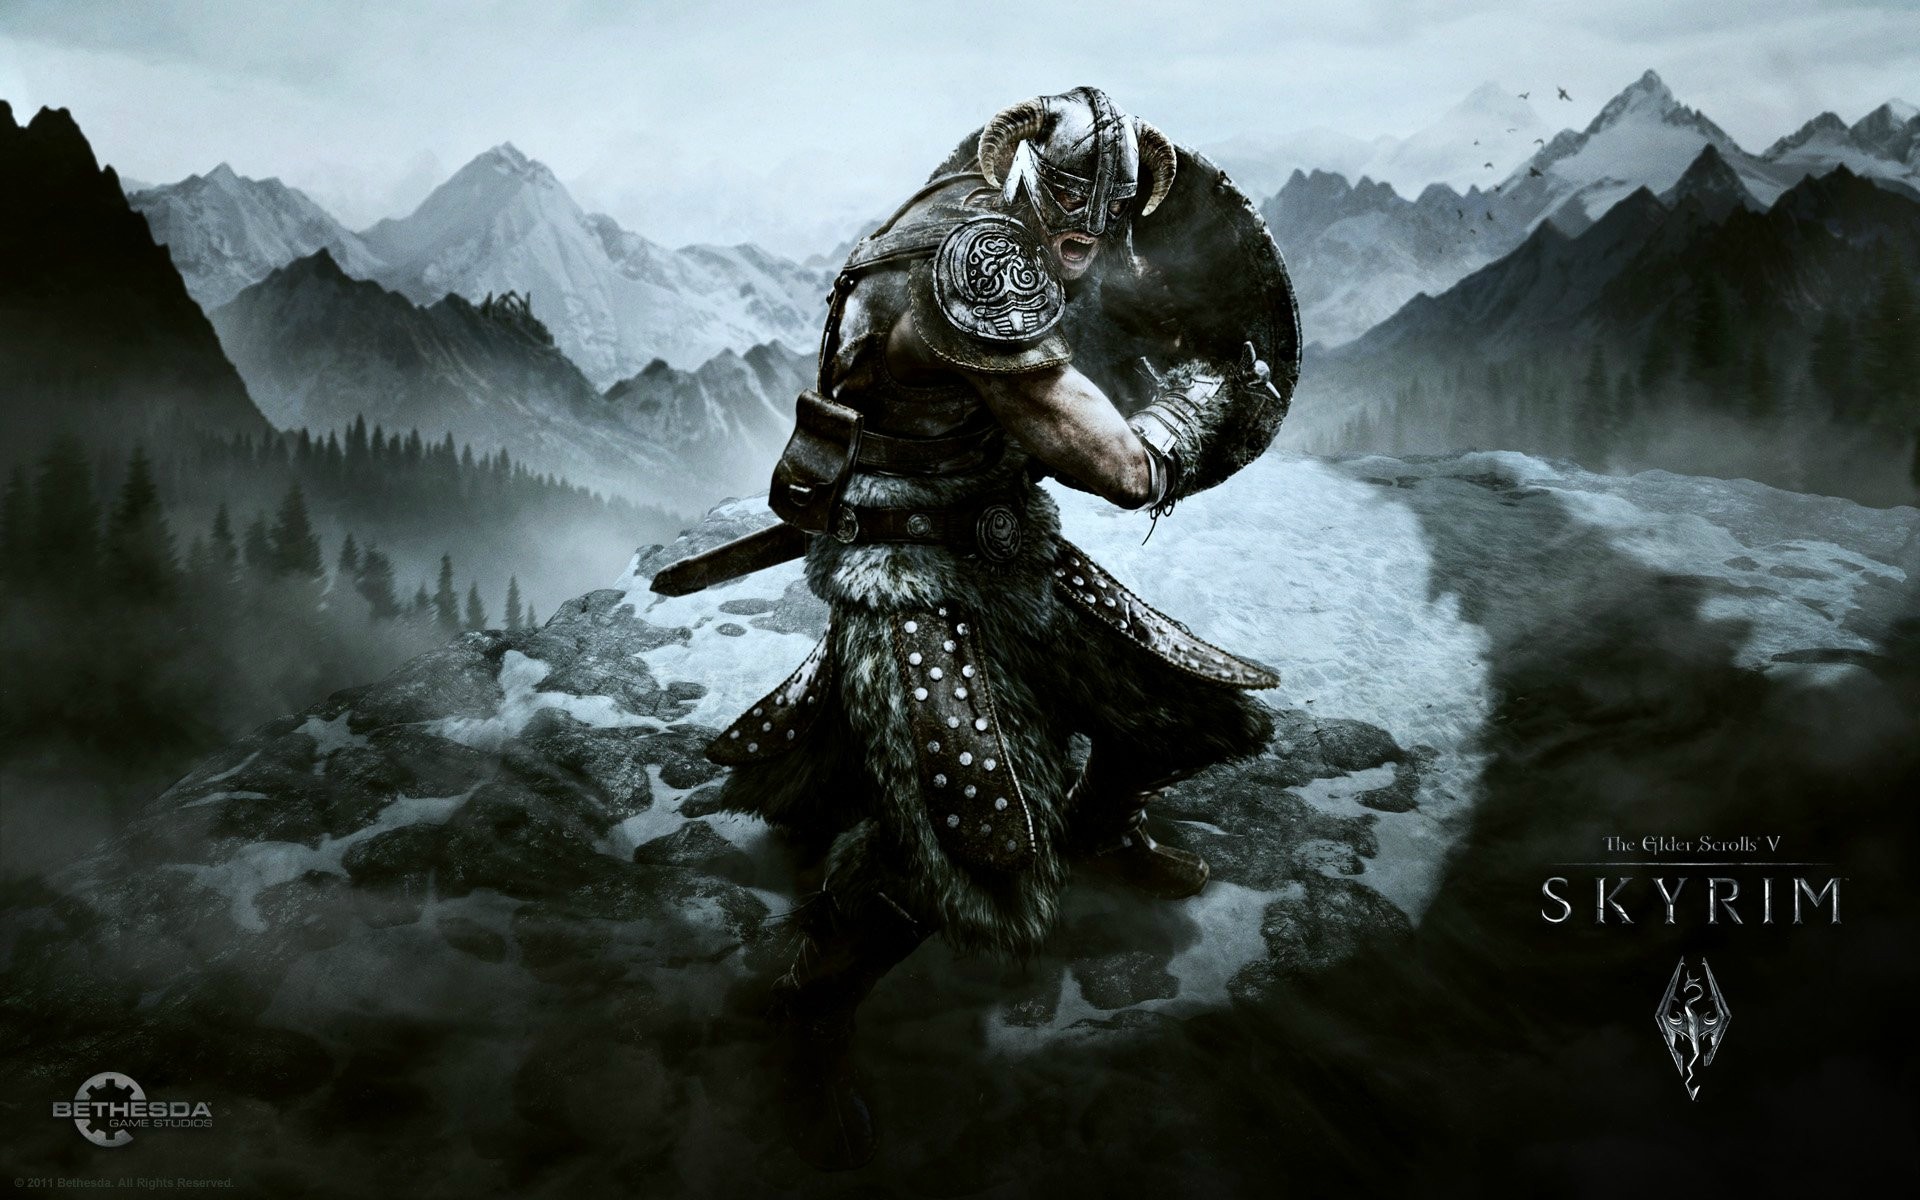 Check Out This Bad Ass Skyrim Wallpaper Background Click